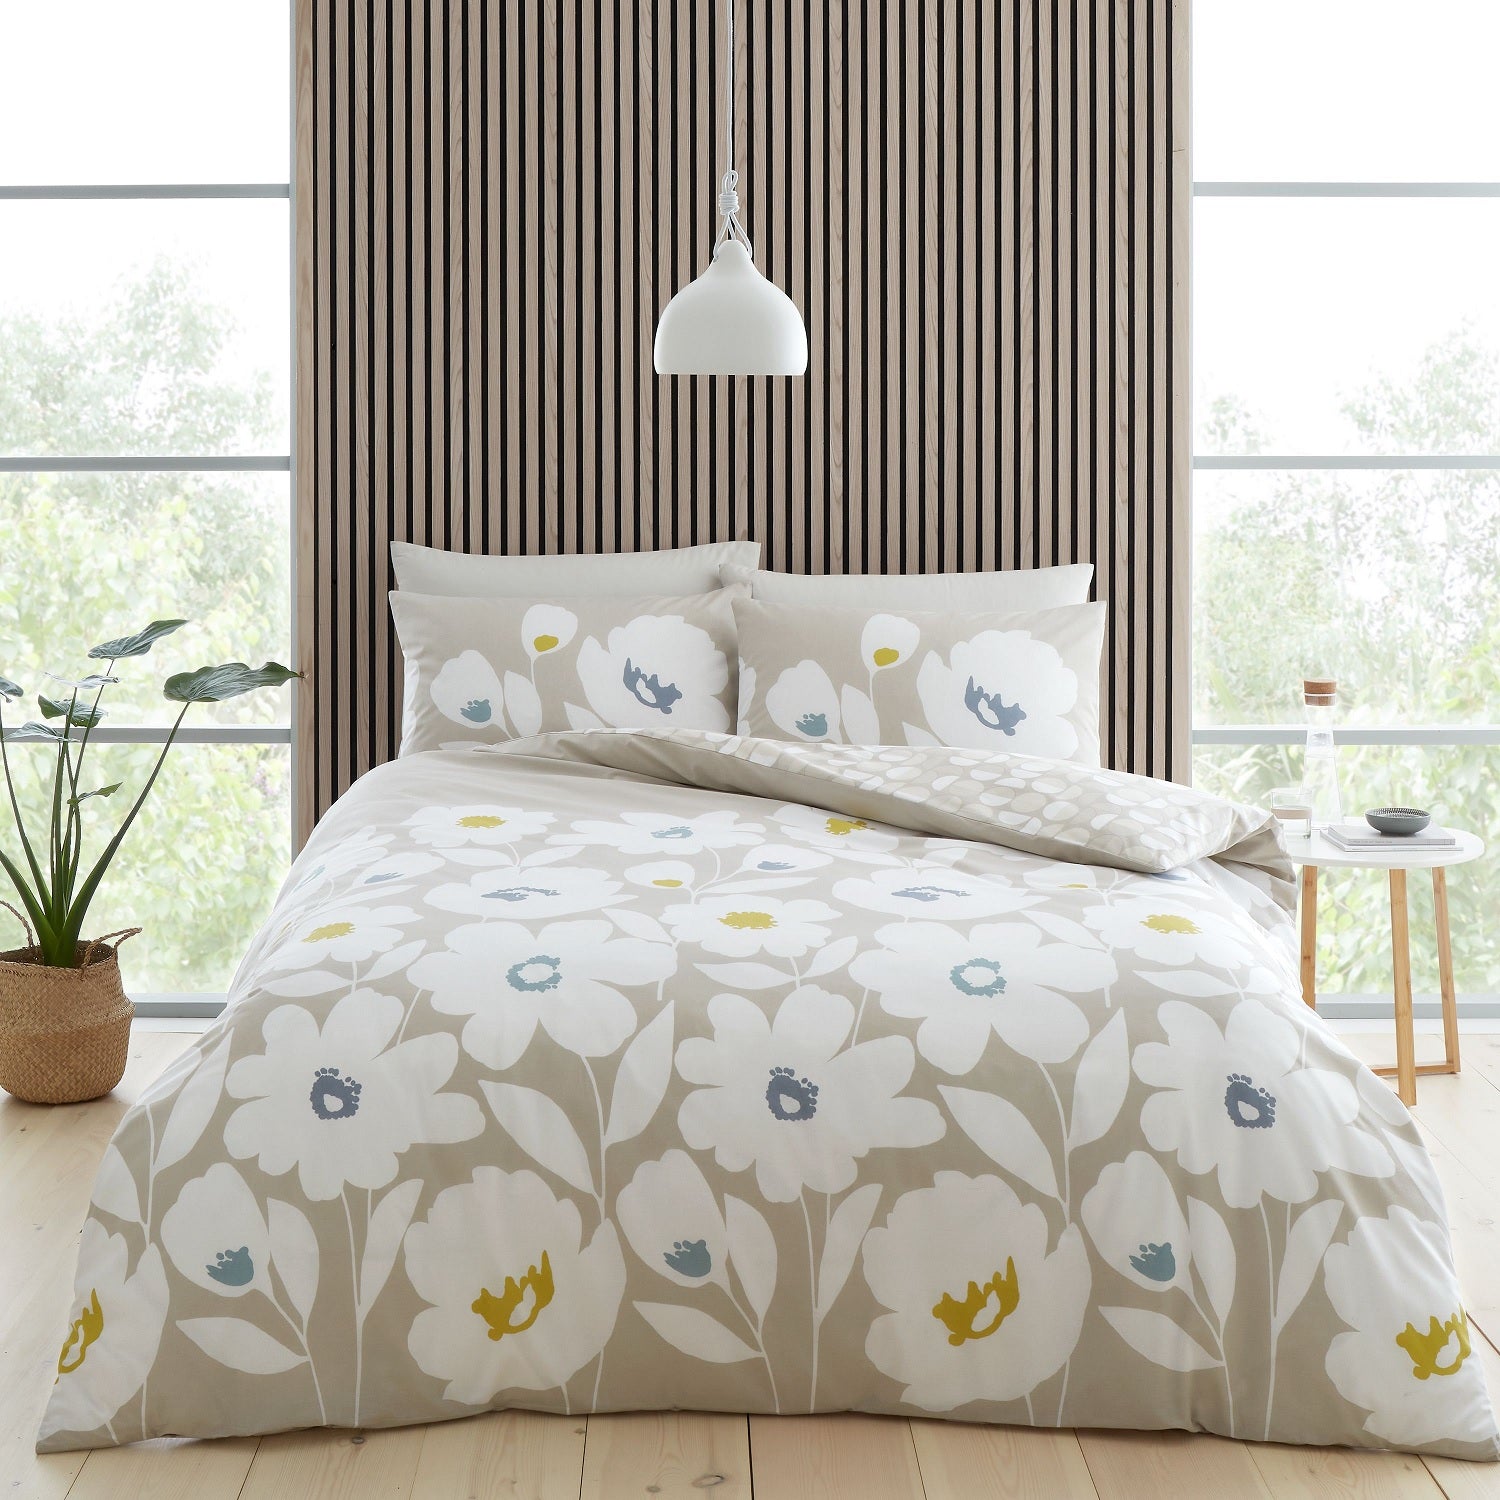 Catherine Lansfield Geometric Floral Duvet Cover Set, King, Natural